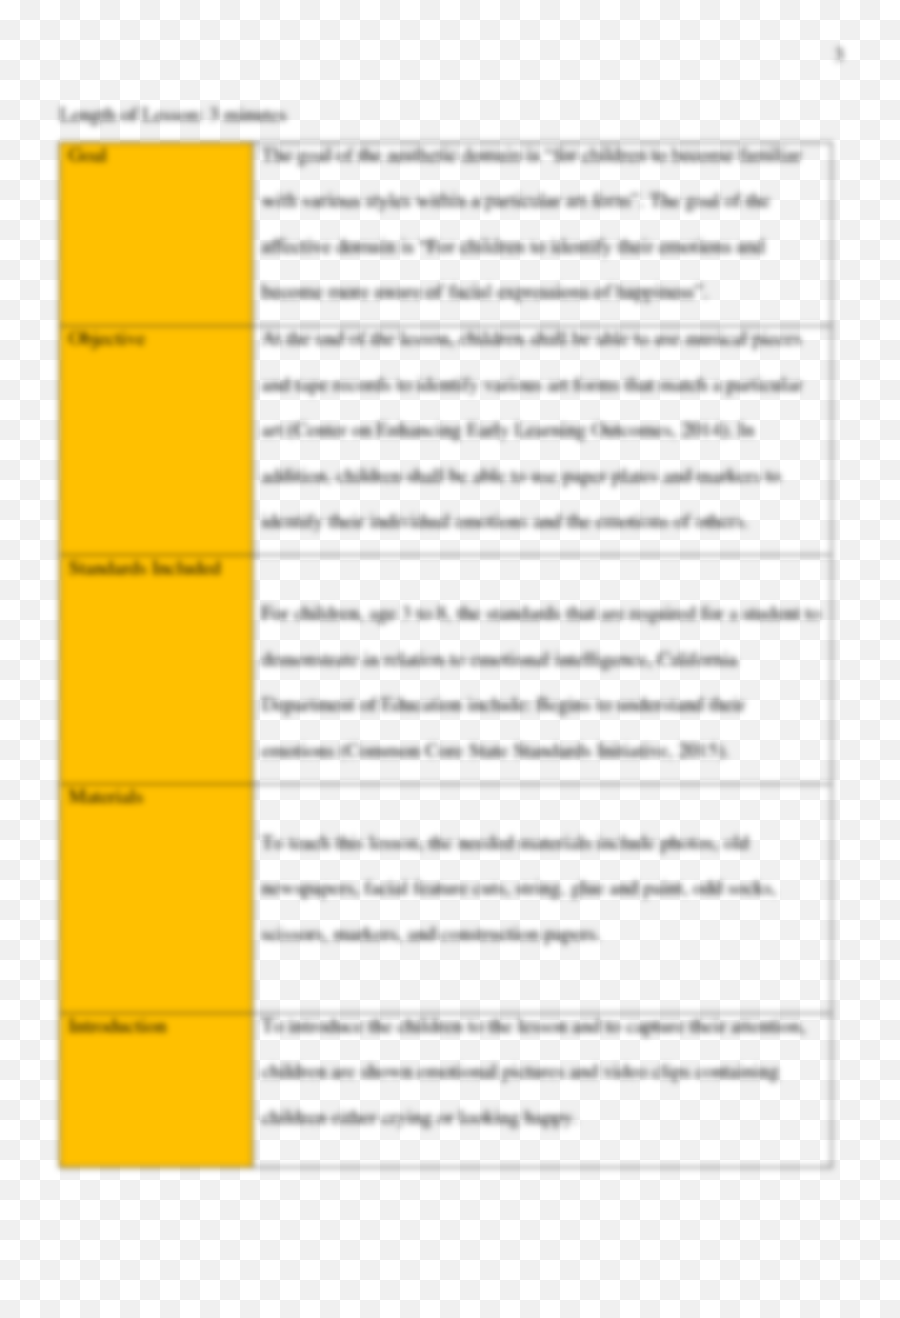 Aesthetic And Affective Lesson Plan - Document Emoji,Relate Aesthetic Emotion To Art